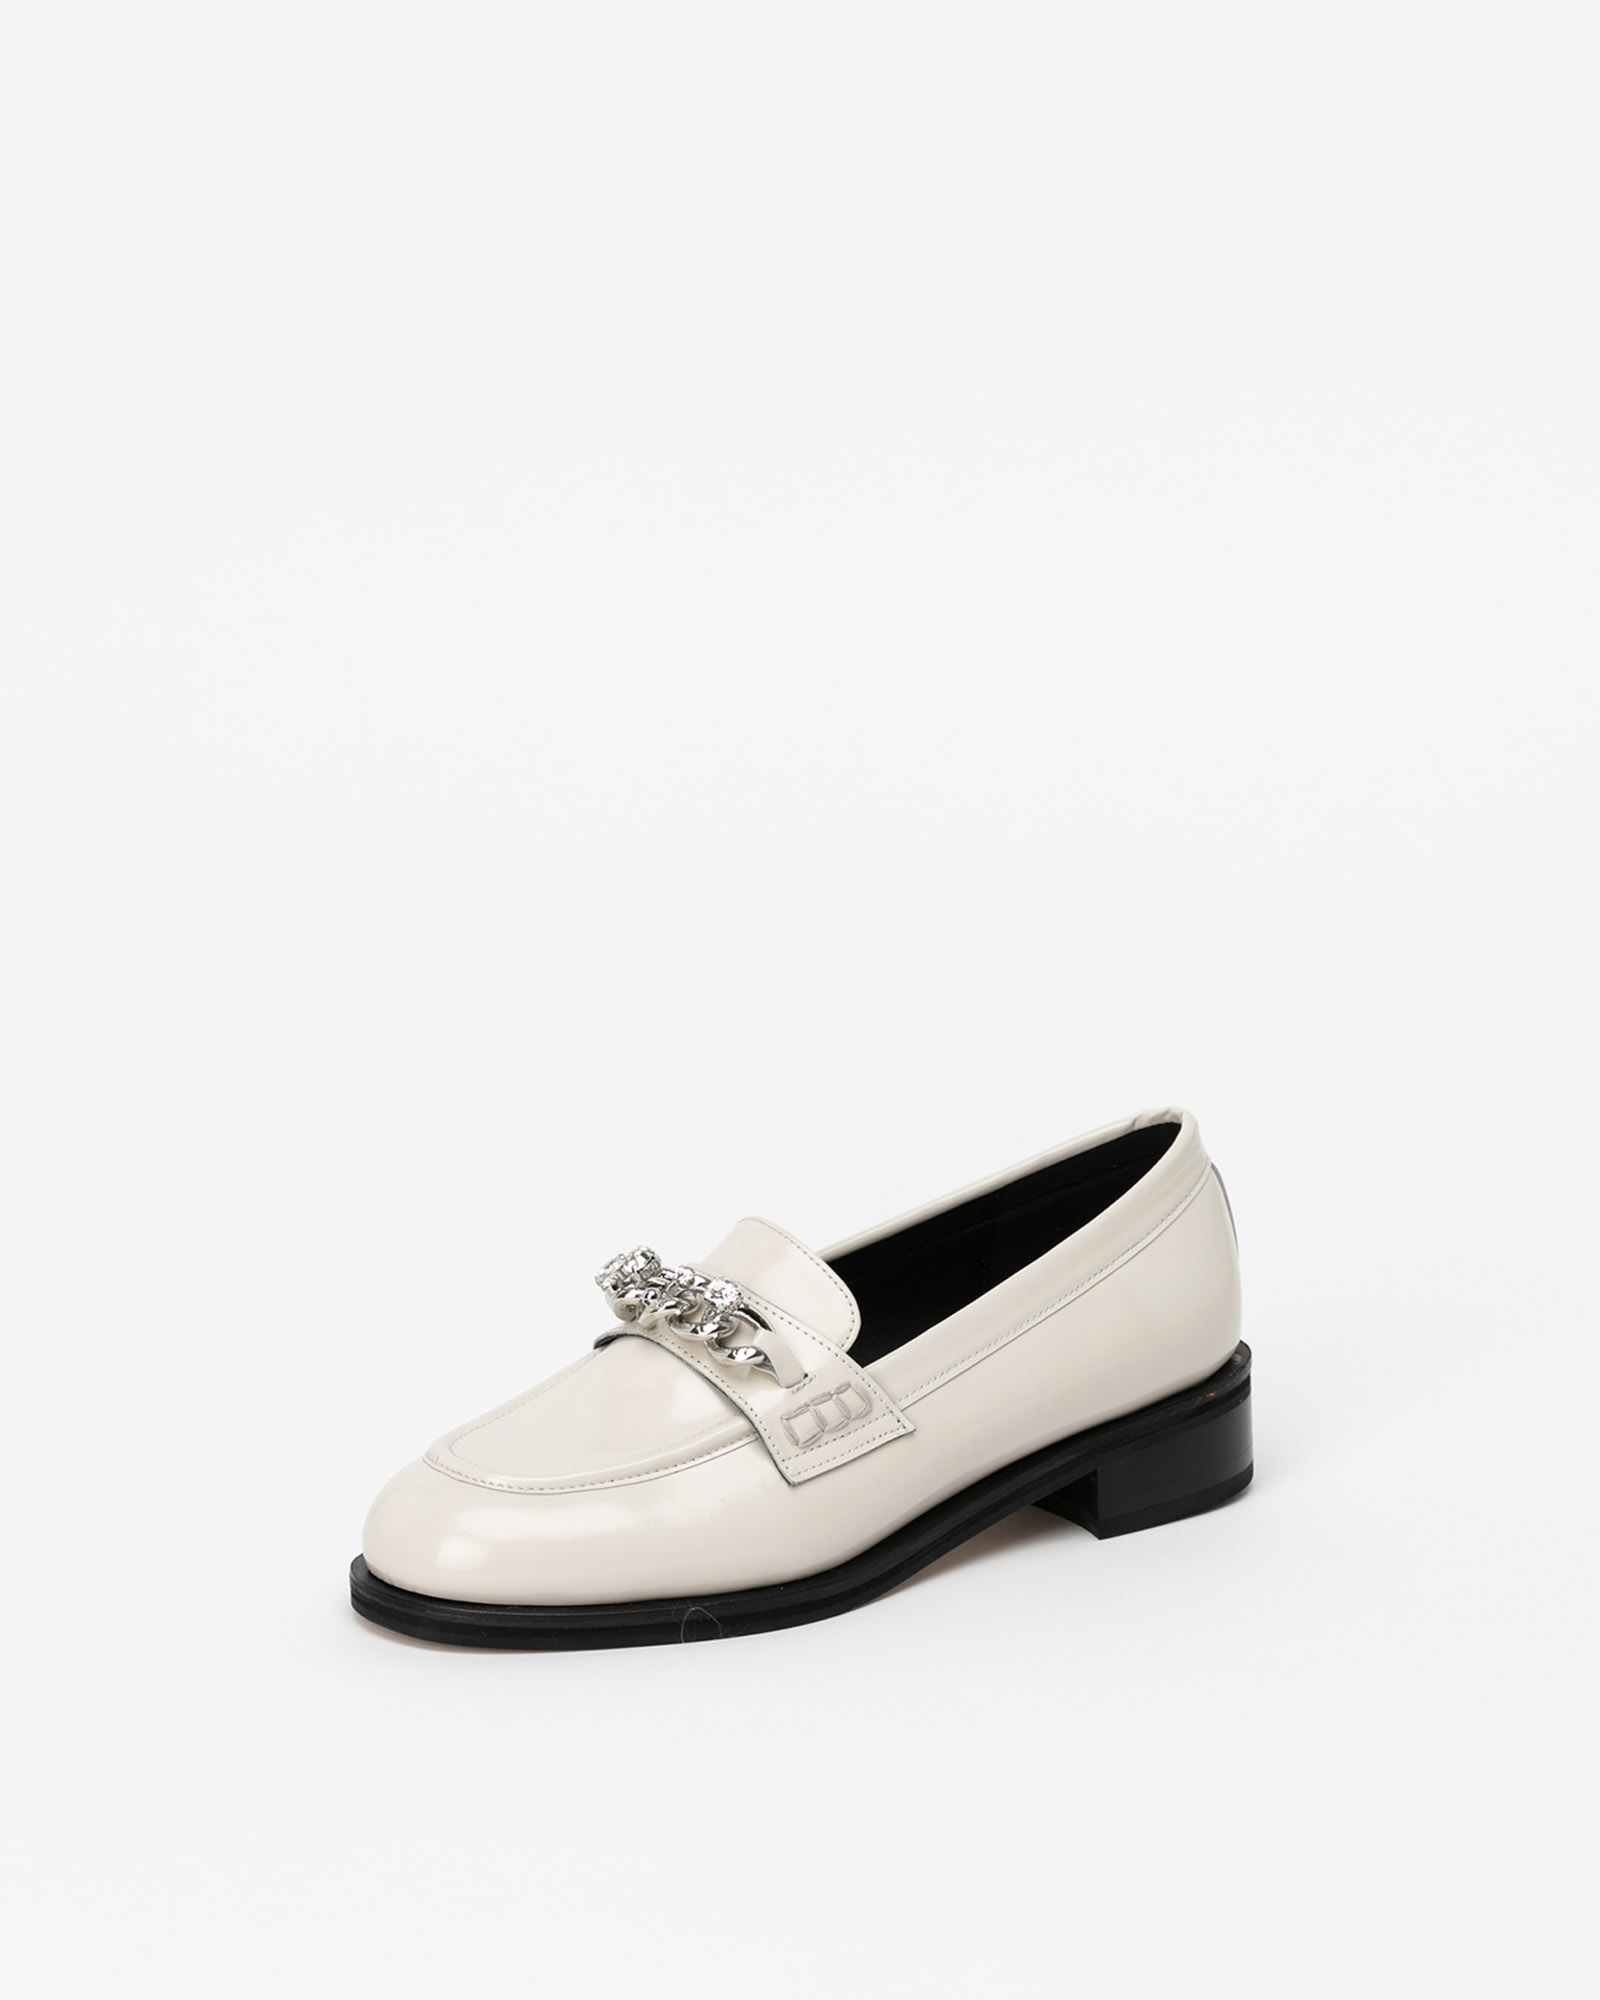 Mezza Embellished Chain Loafers